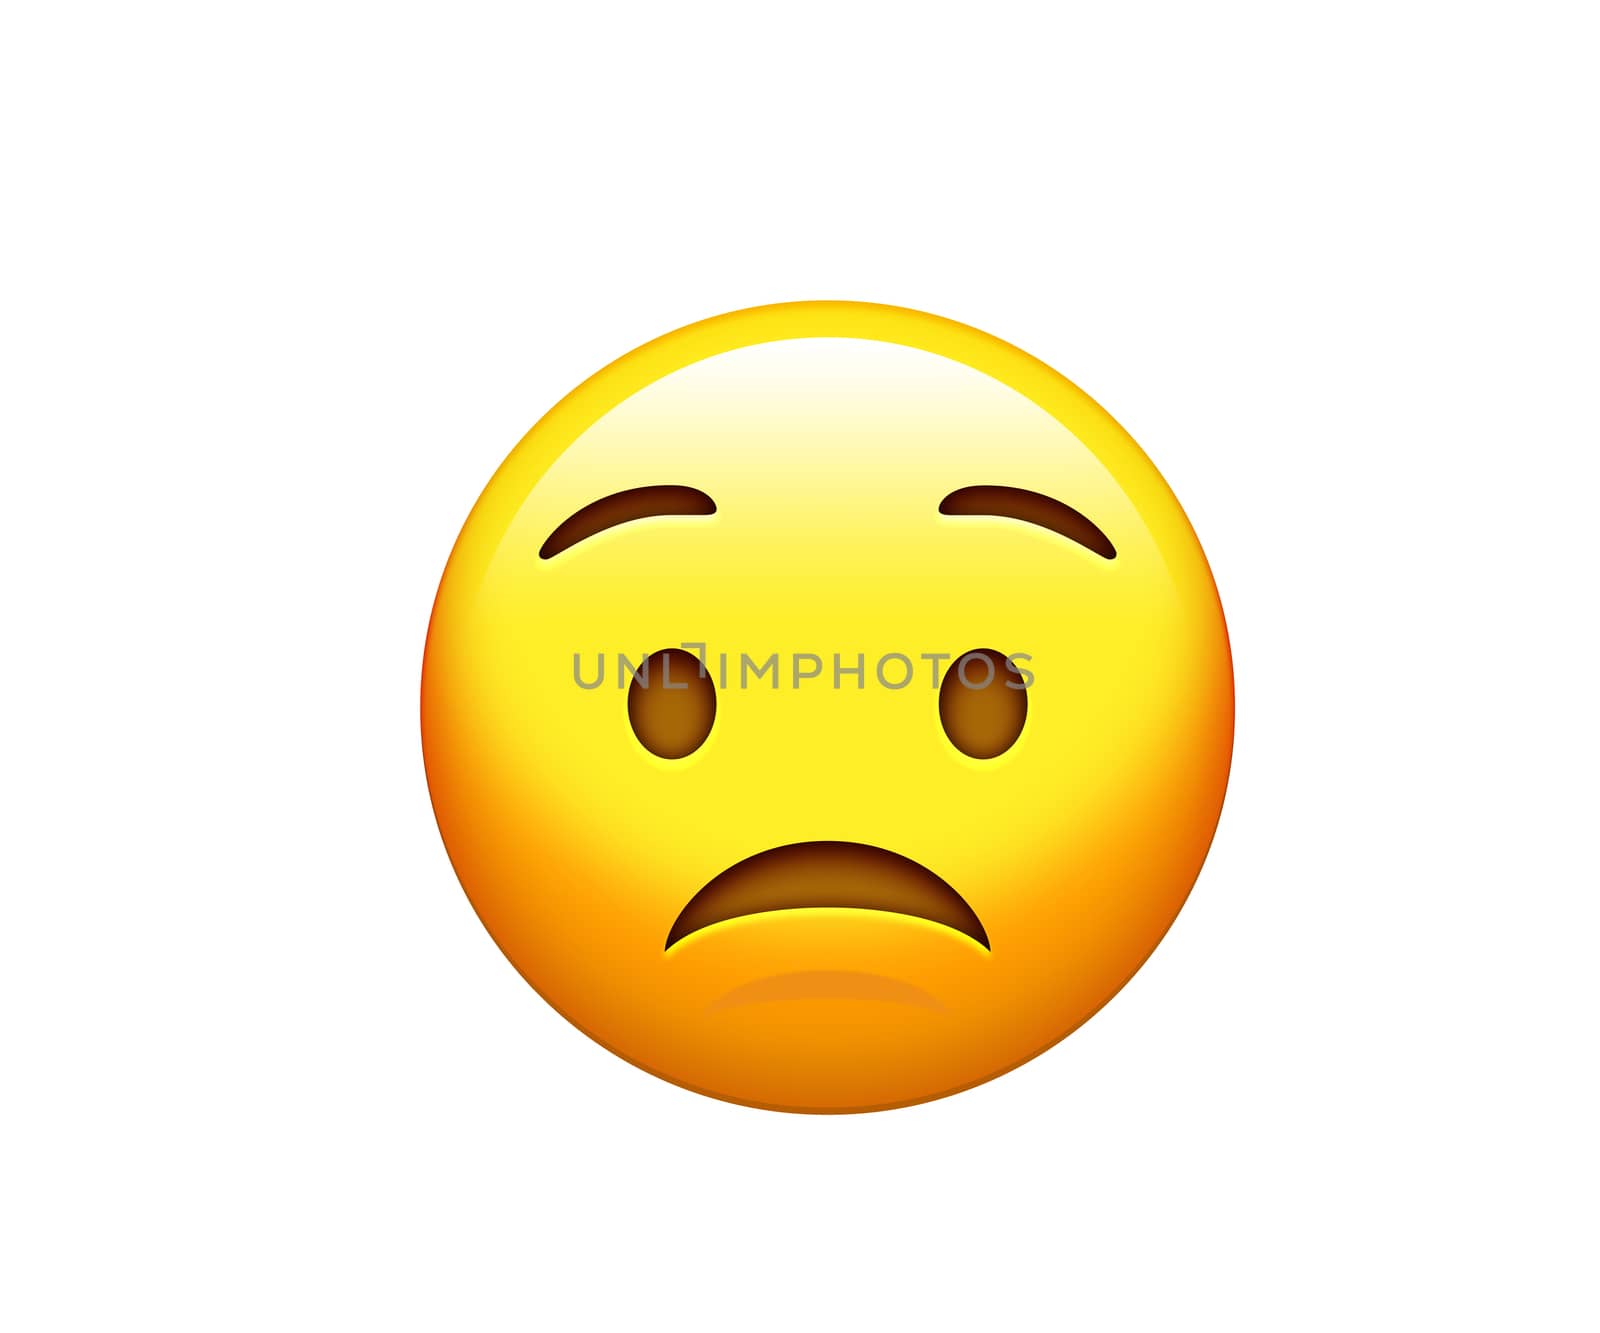 The emoji yellow sad, upset face with frown icon